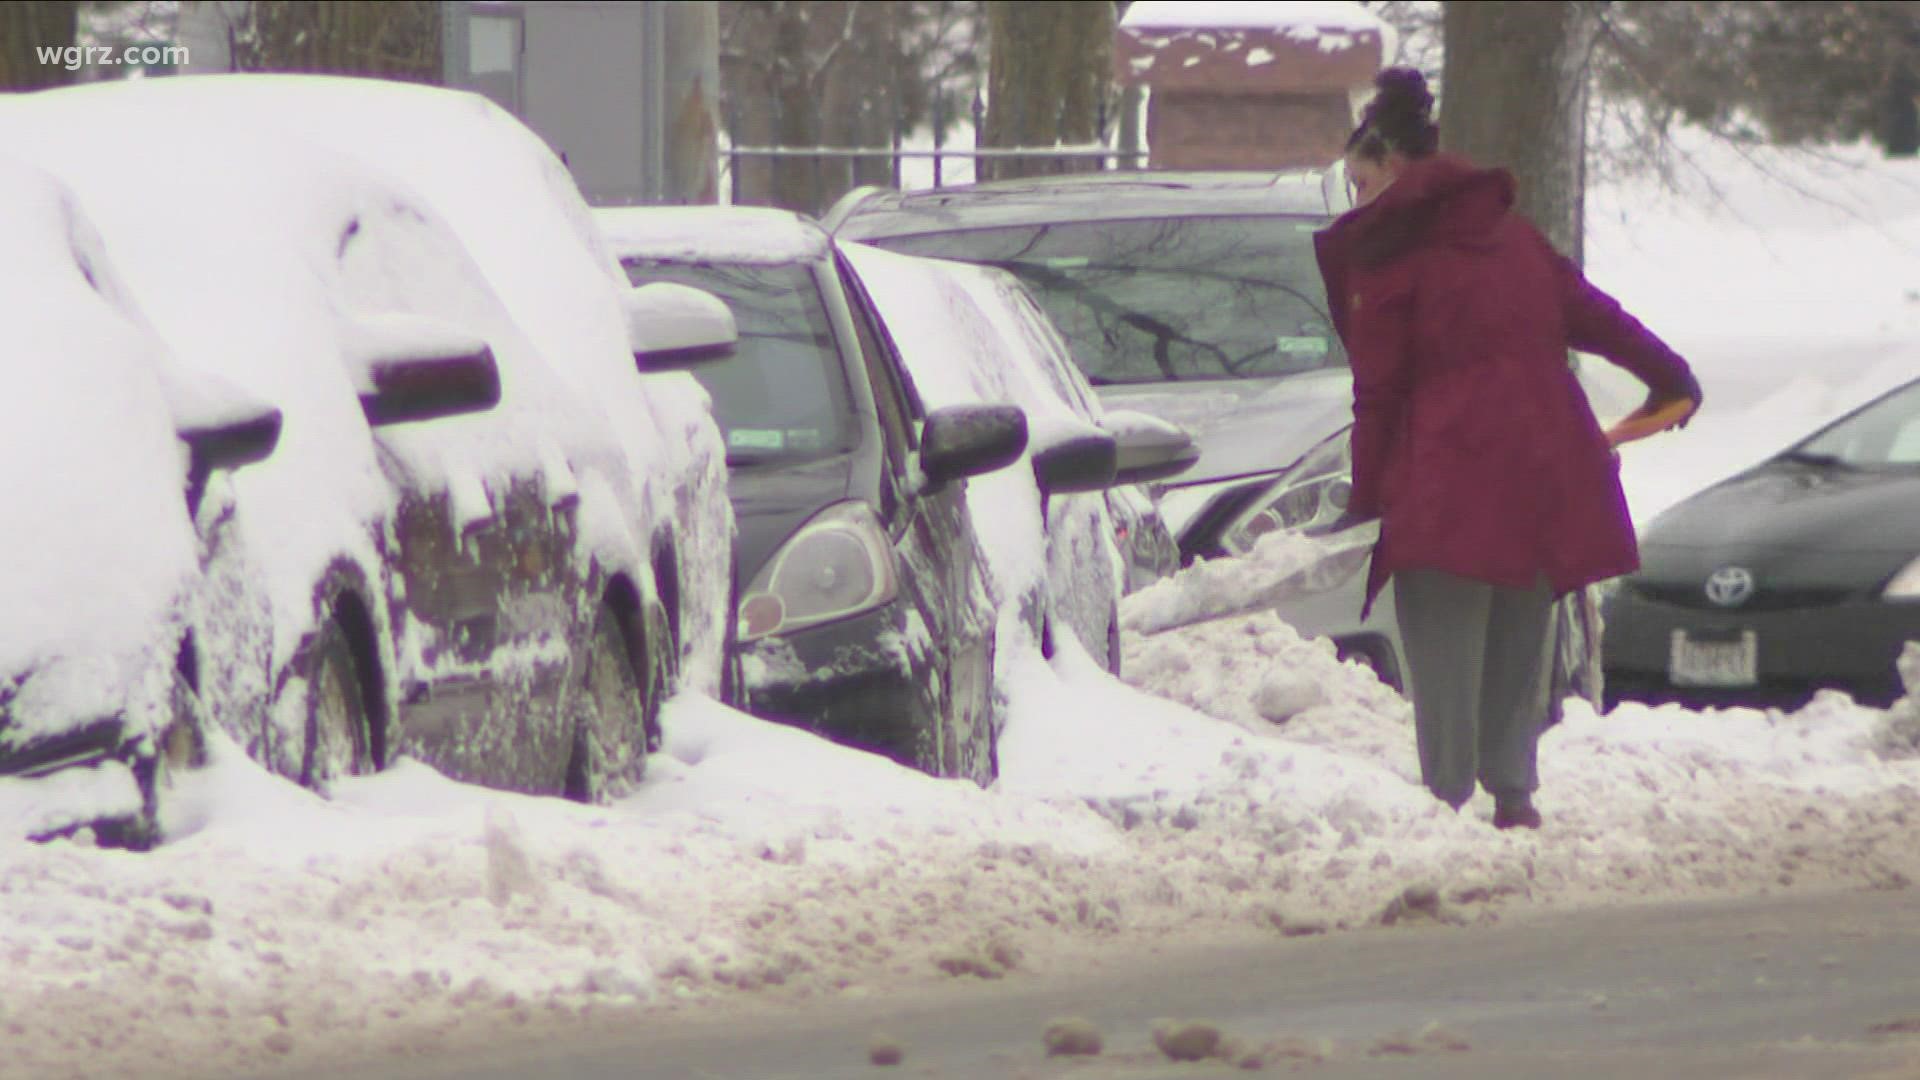 There have been community-wide concerns and frustrations related to snow removal, especially in the city.